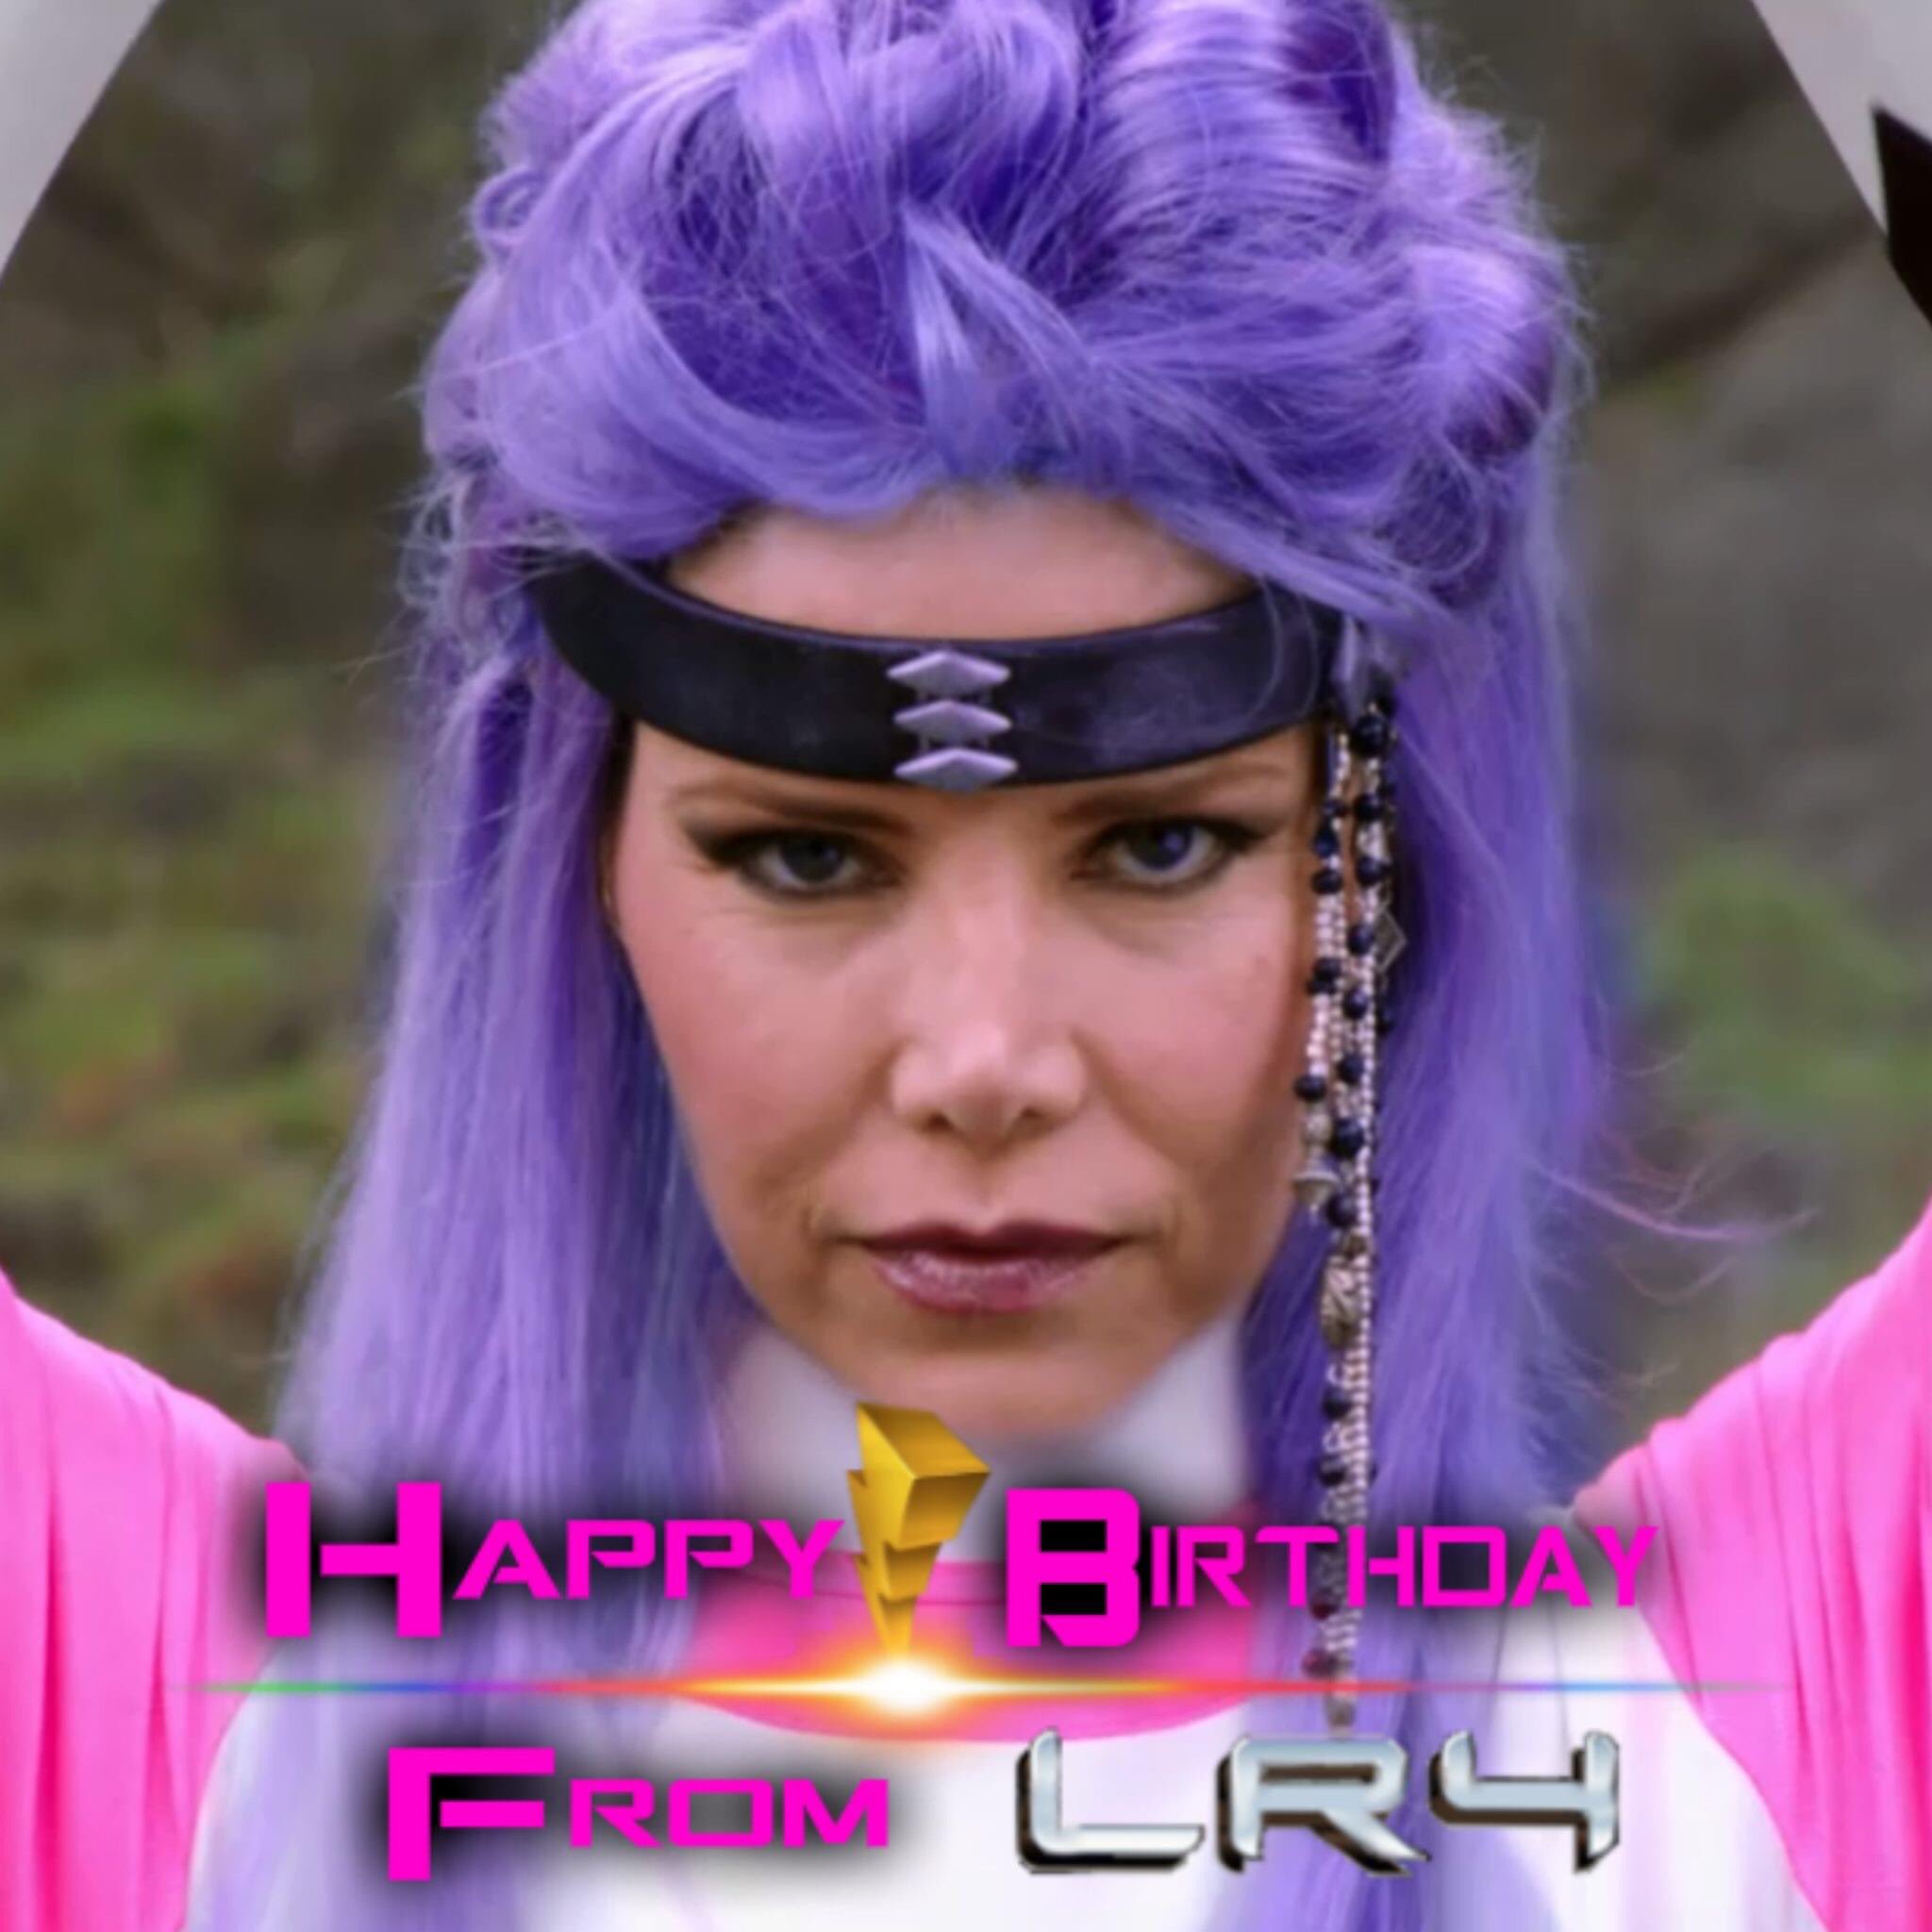 LR4 would like to wish Melody Perkins a Happy Birthday! 